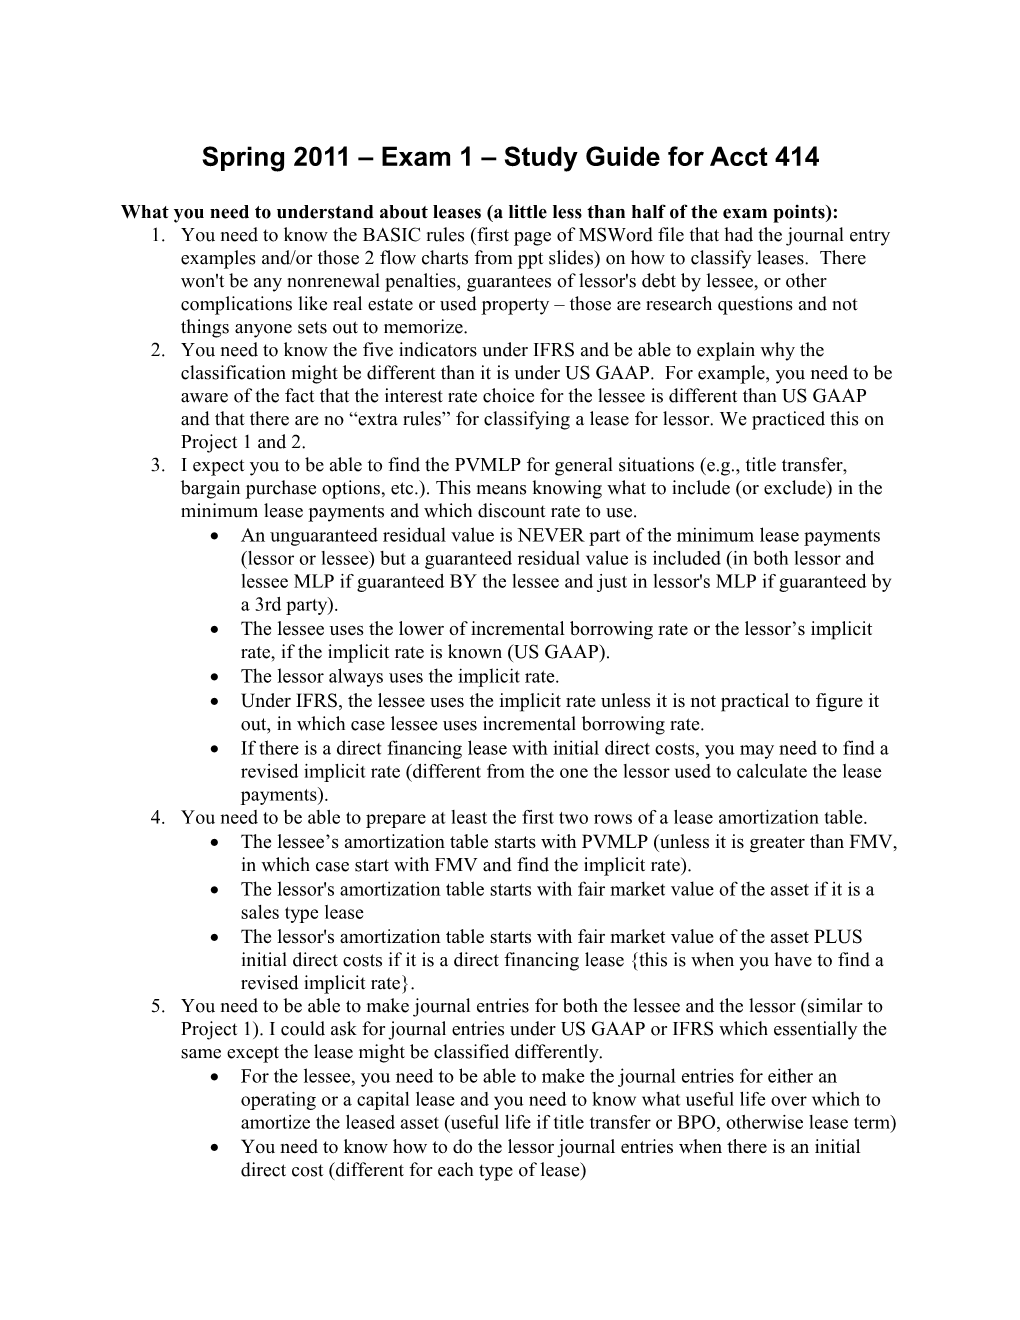 Fall 2008 Exam 1 Study Guide for Acct 414